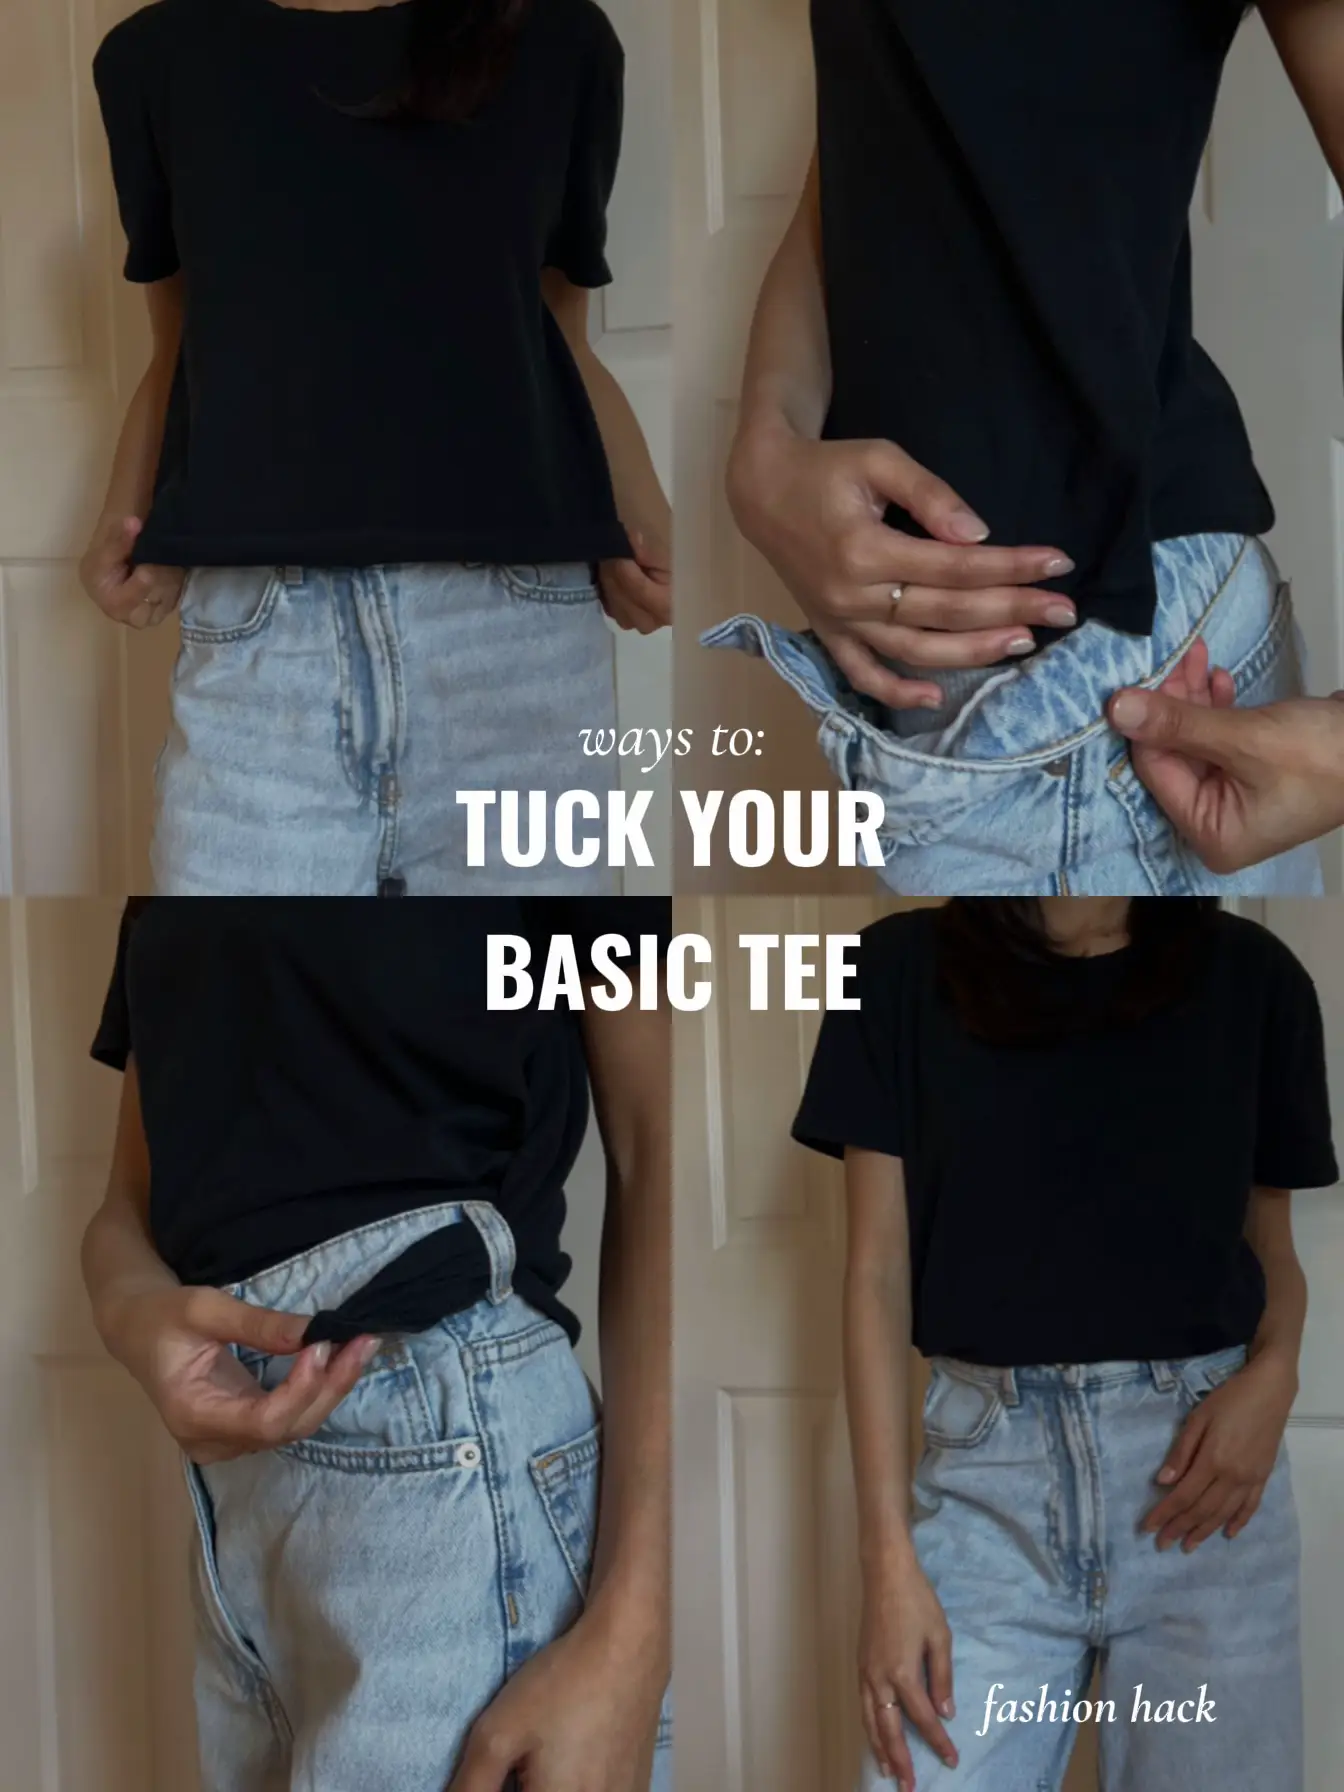 Windsor Fashions - The bra tuck is our new fave style hack. What's